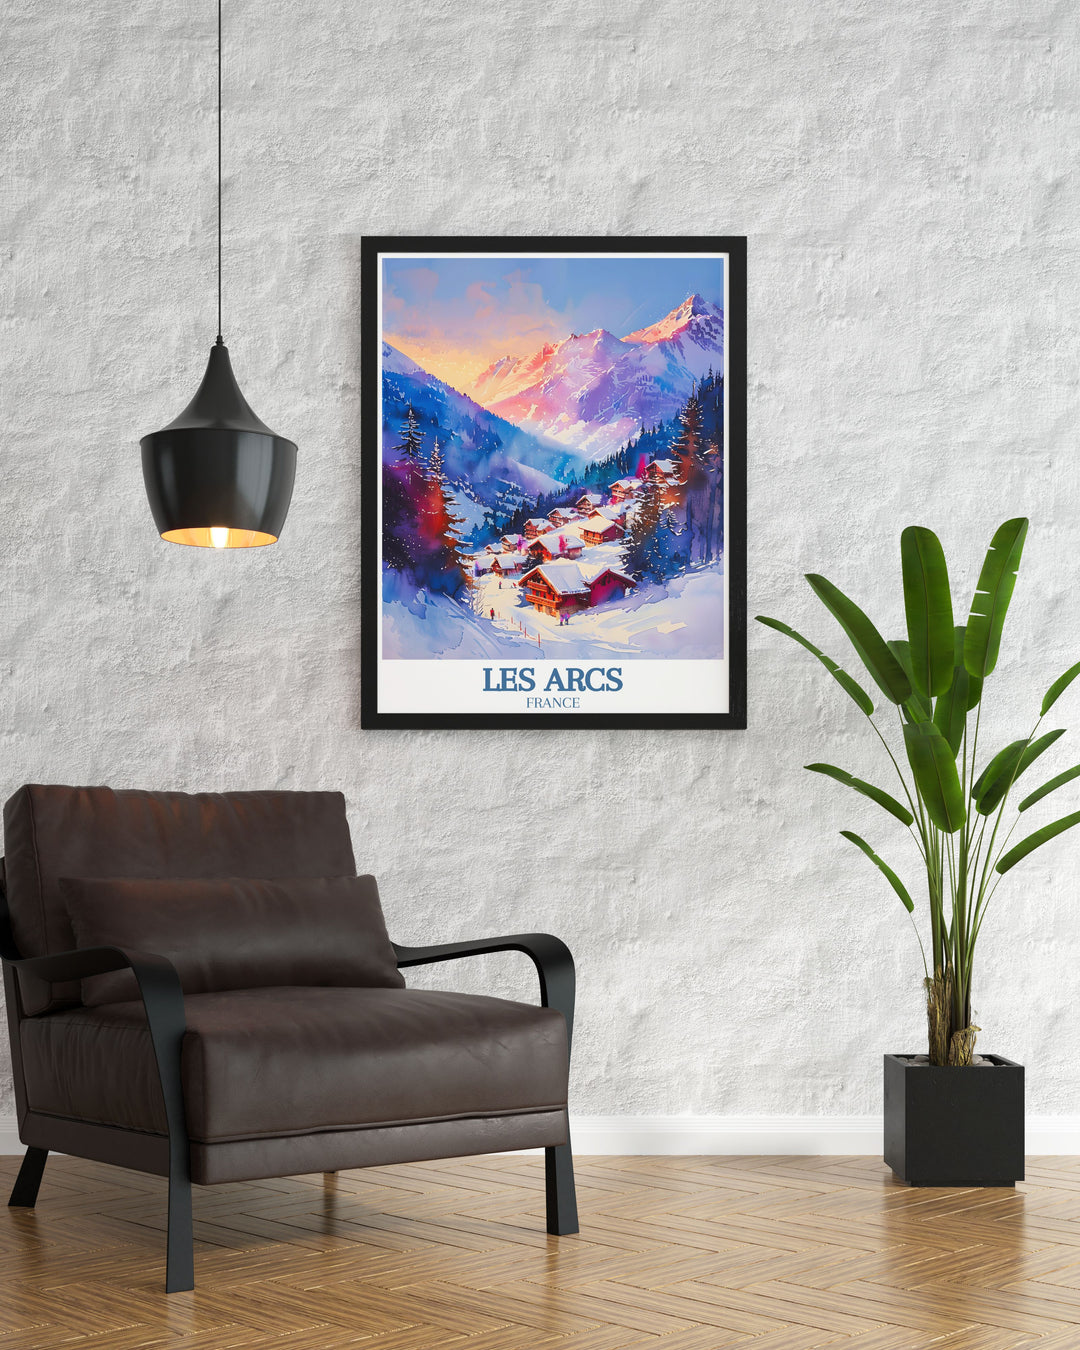 Vintage ski poster of Aiguille Rouge Mont Blanc in Les Arcs perfect for adding a touch of classic ski charm to your living room or office and celebrating the thrill of skiing